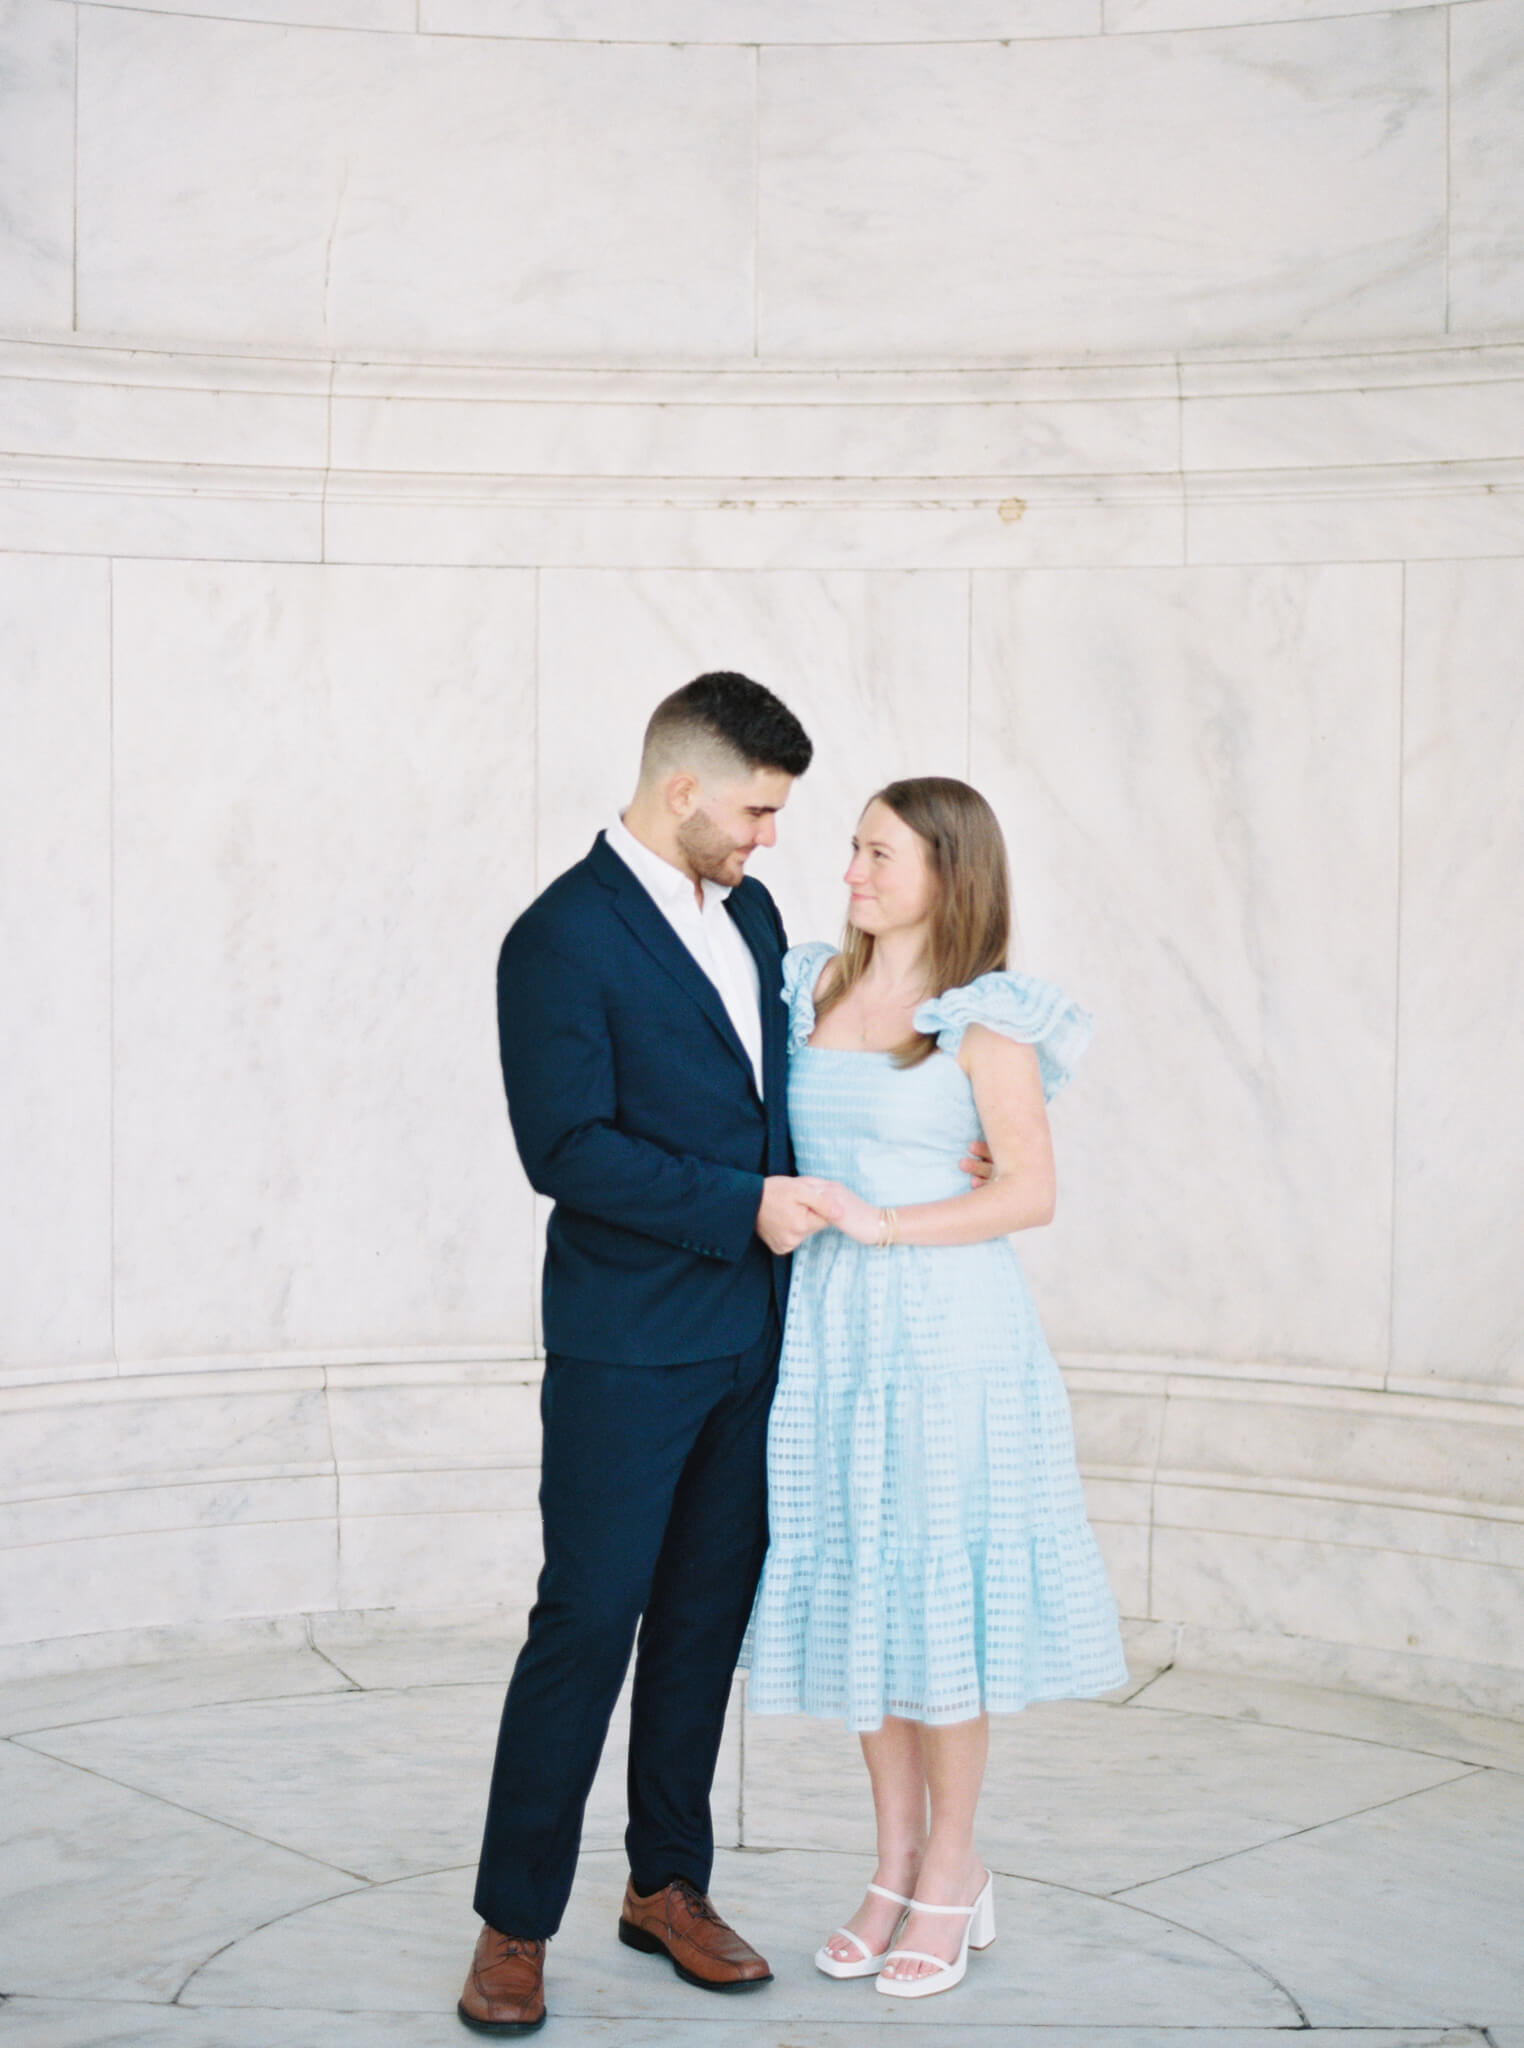 A man in a blue suit and his fiancée wearing a light blue dress standing arm in arm in front of a marble wall at the Jefferson Memorial looking at each other